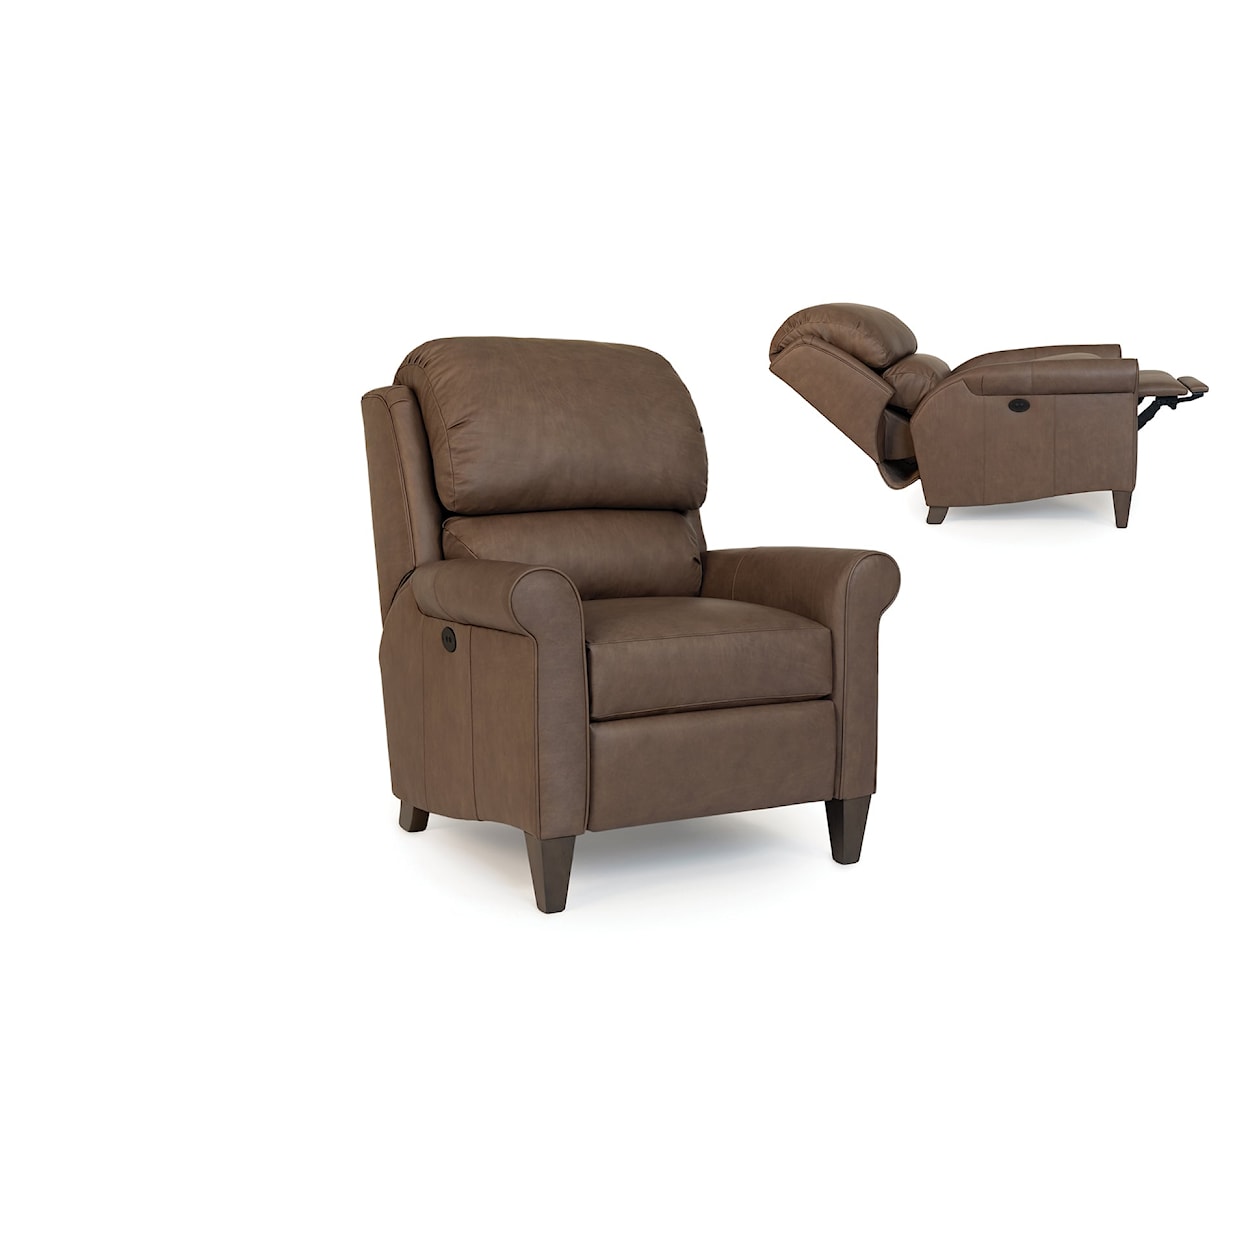 Smith Brothers 735 Power Recliner